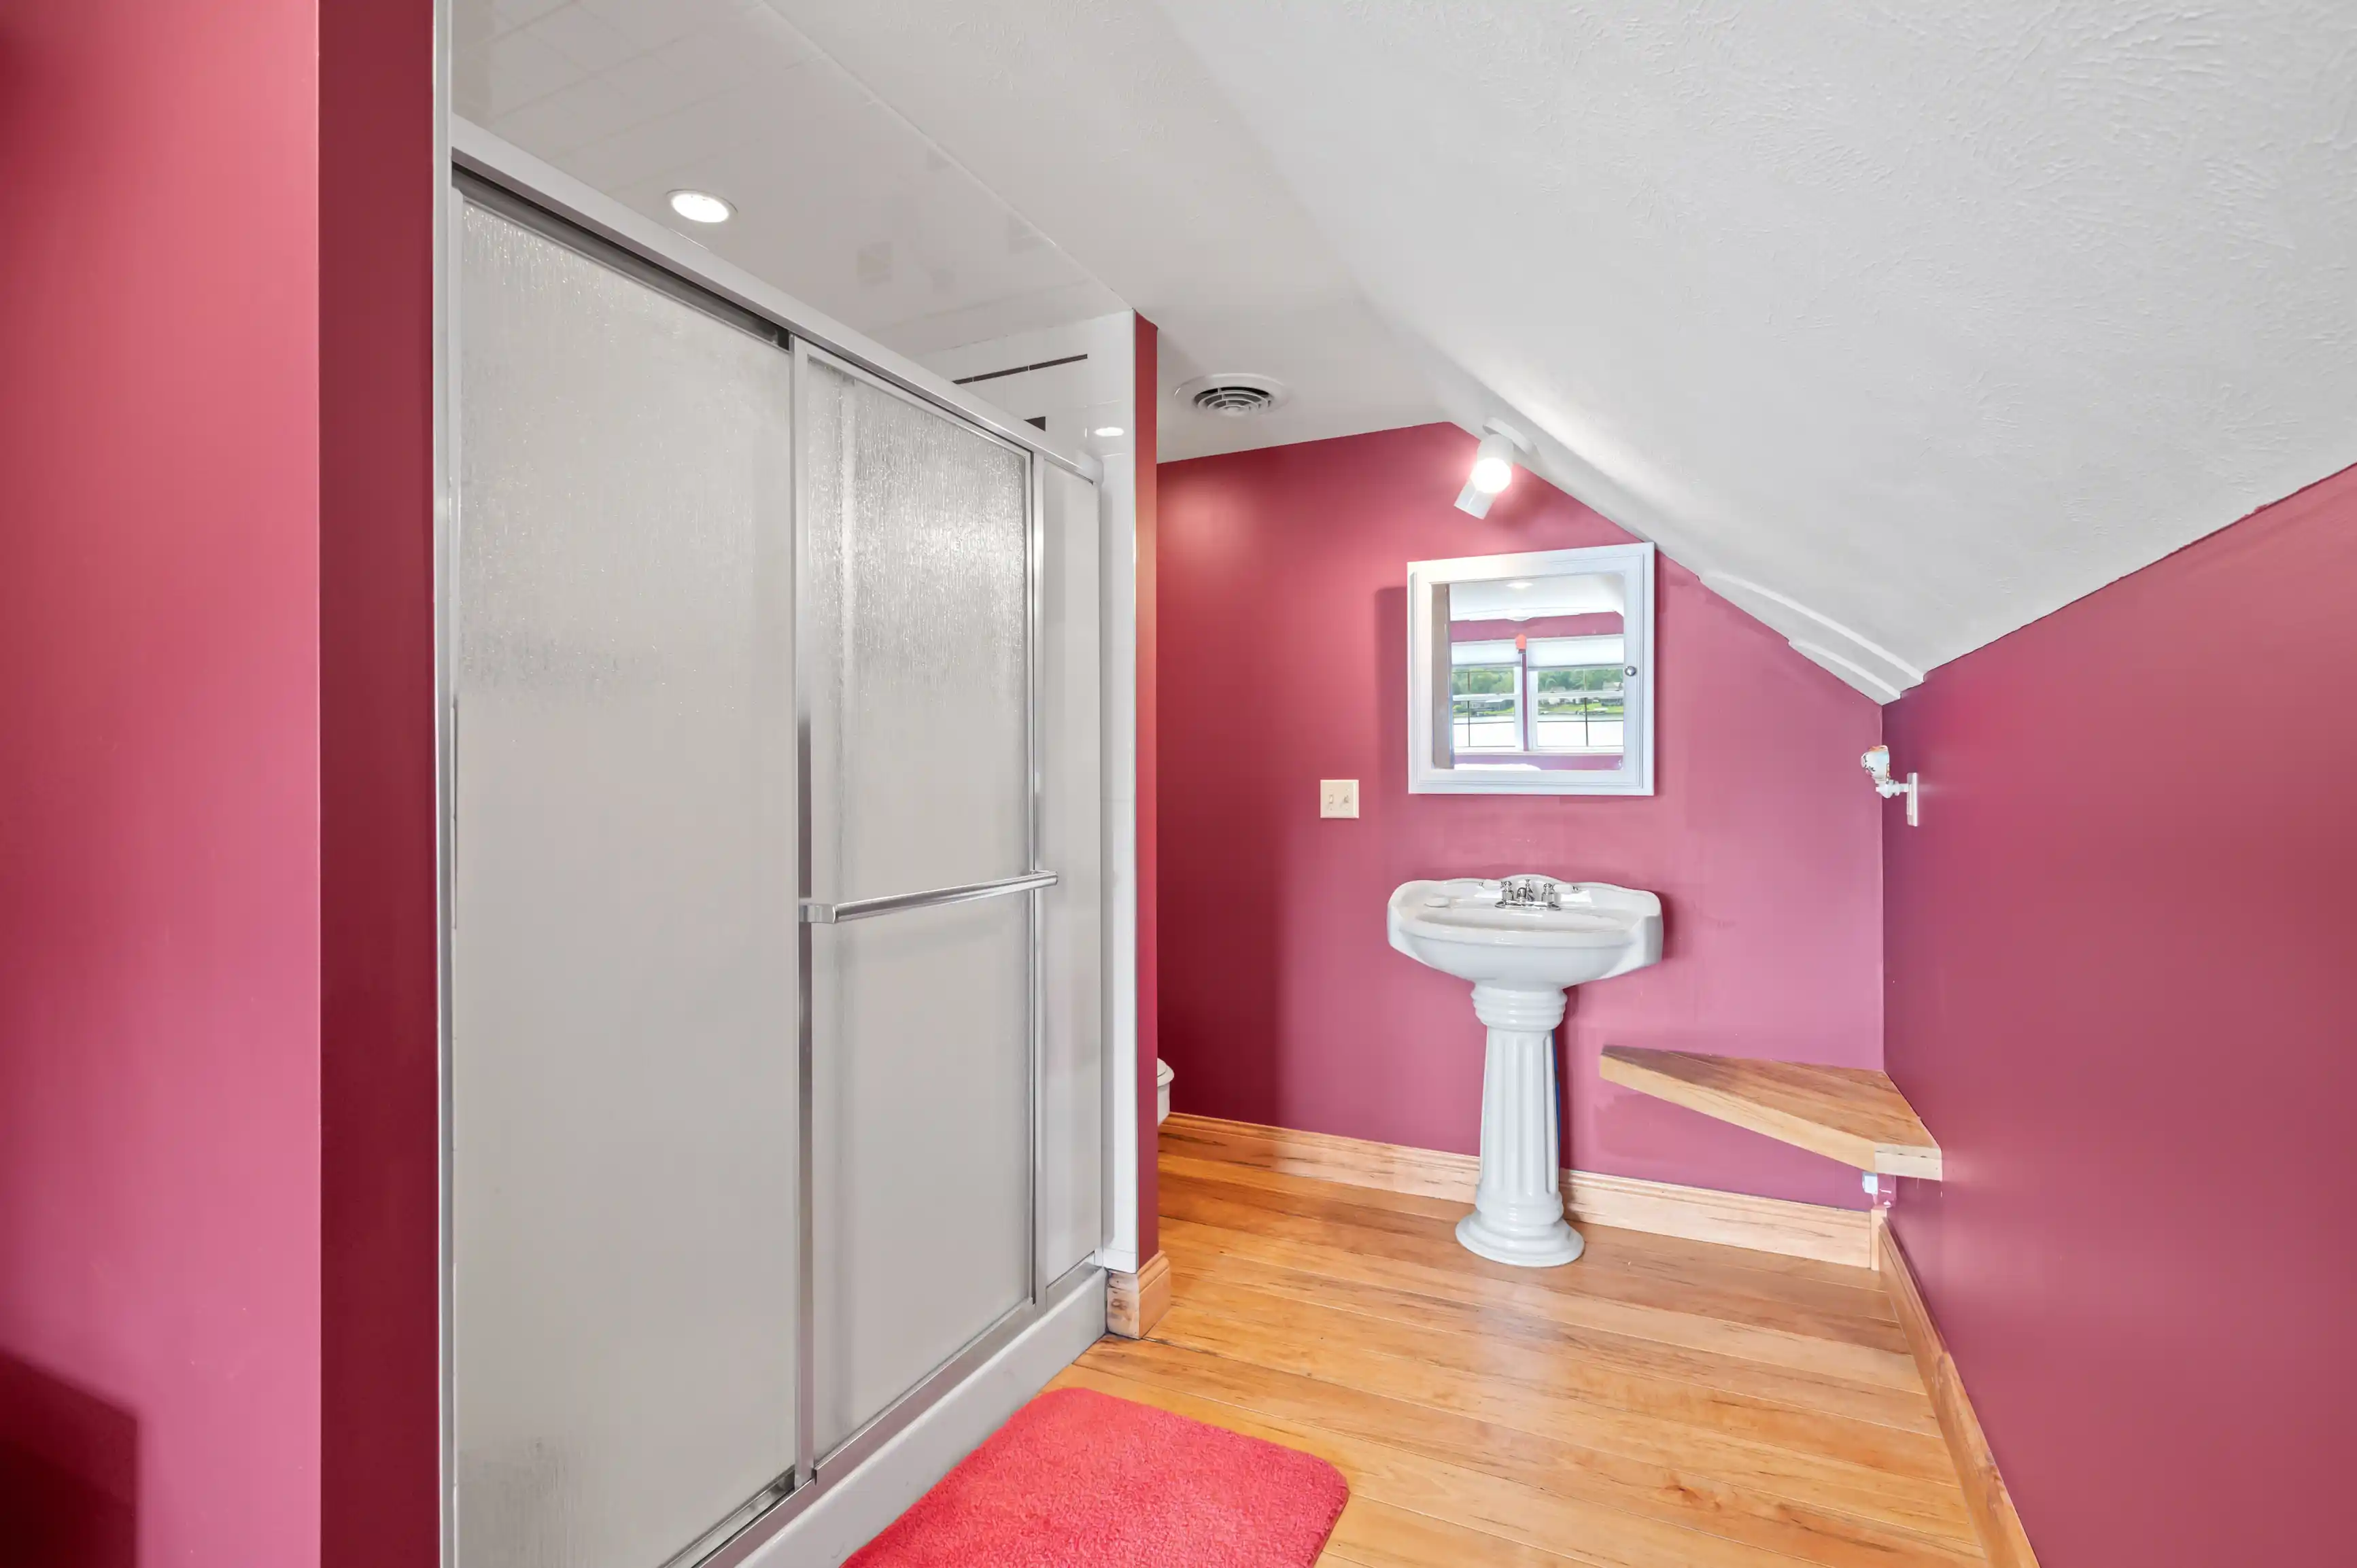 Interior of a bathroom with magenta walls, hardwood floors, a glass shower door, pedestal sink, and a small wooden shelf under a window with a view outside.